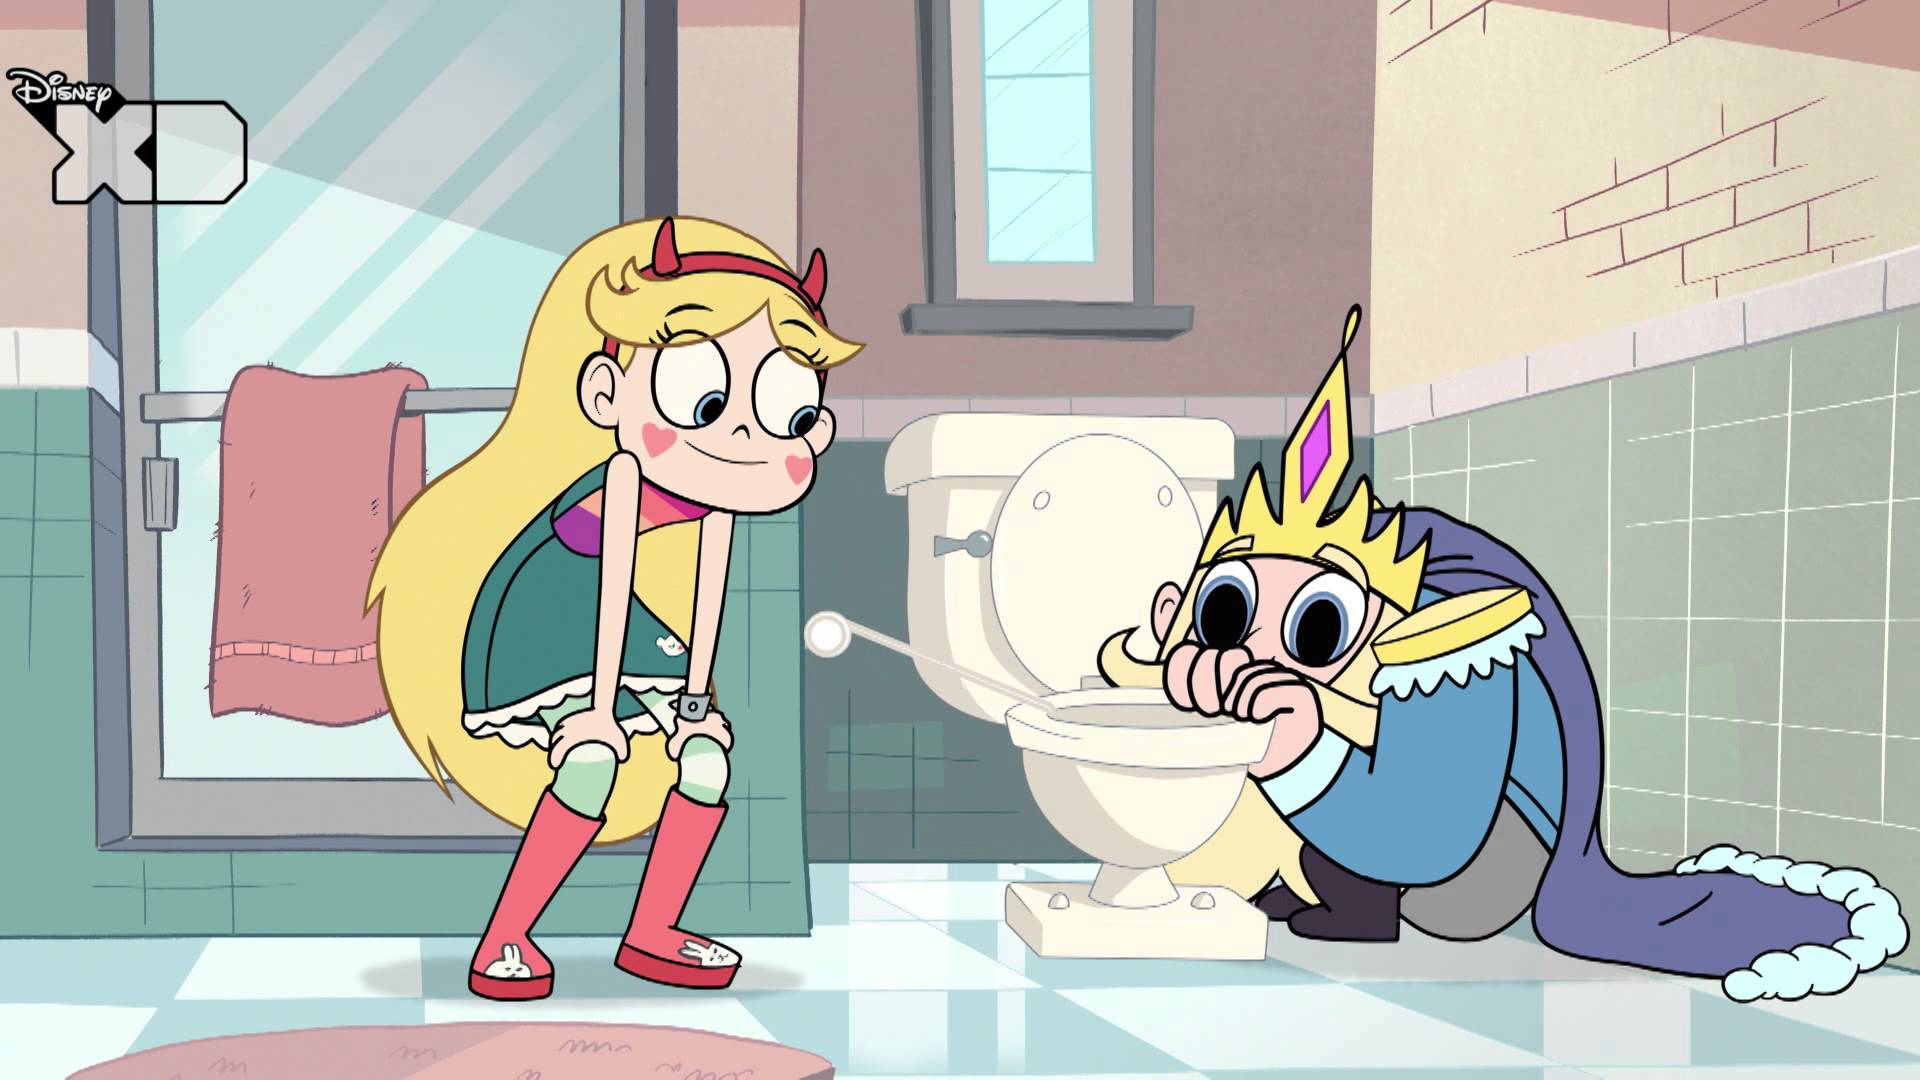 The Toilet. Star vs. The Forces Of Evil. Official Disney XD UK